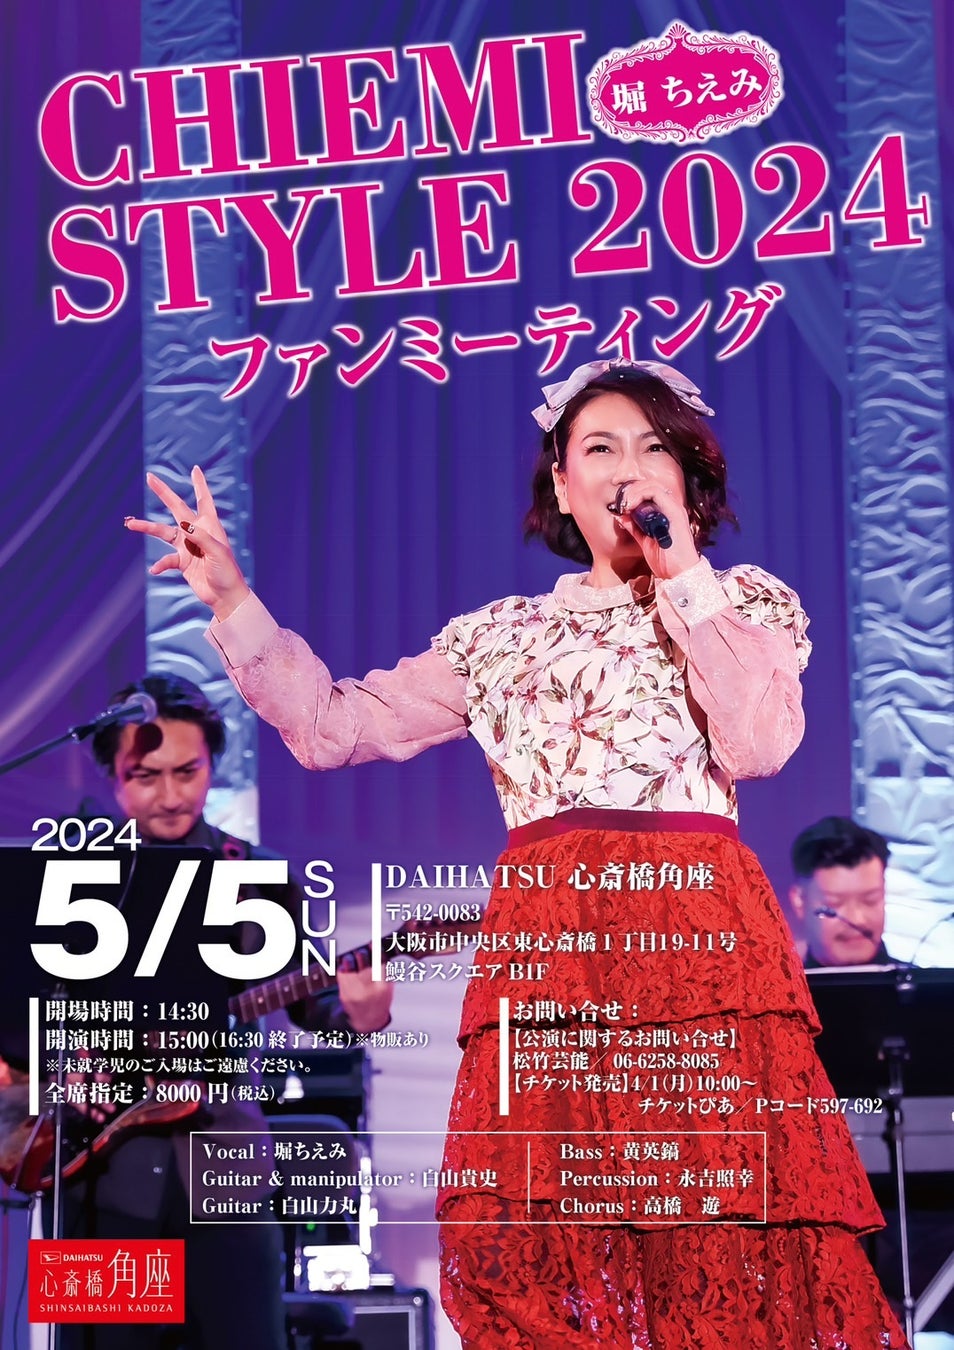 CHIEMI　STYLE　2024　～come to 心斎橋角座～堀ちえみファンミーティング開催が決定！！